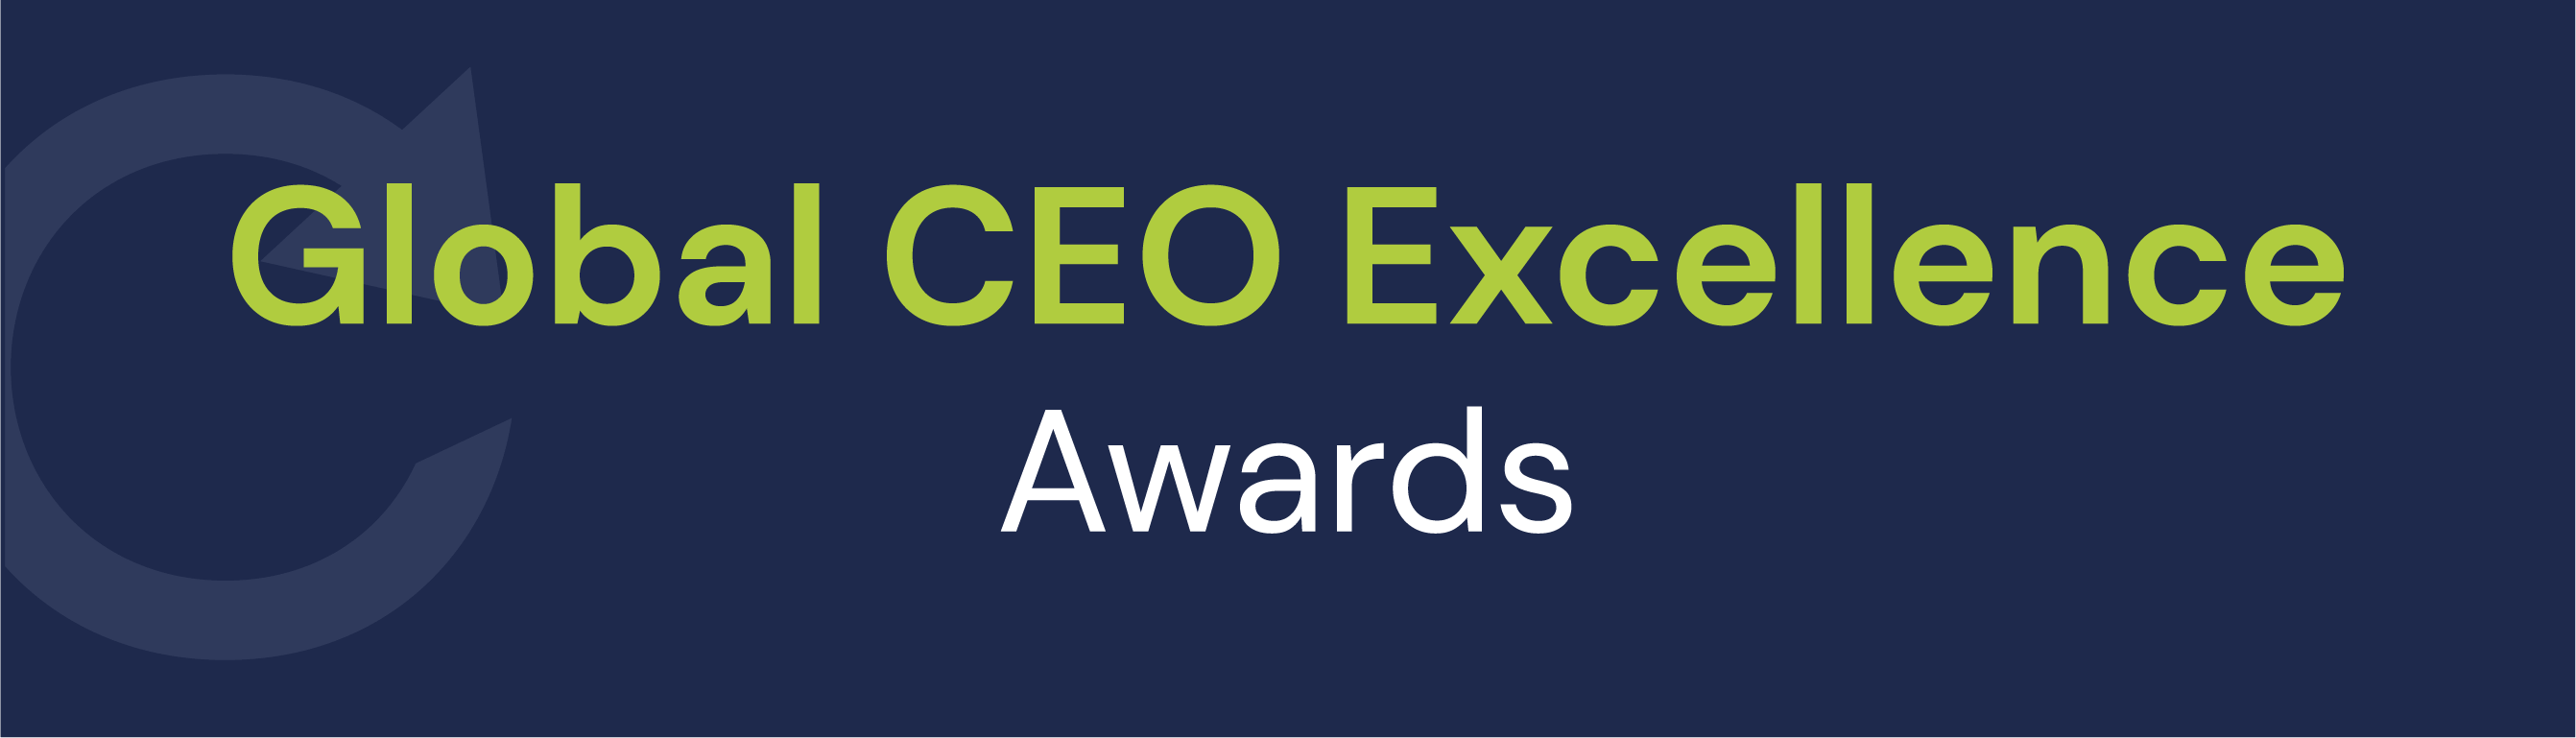 Global CEO Excellence Awards